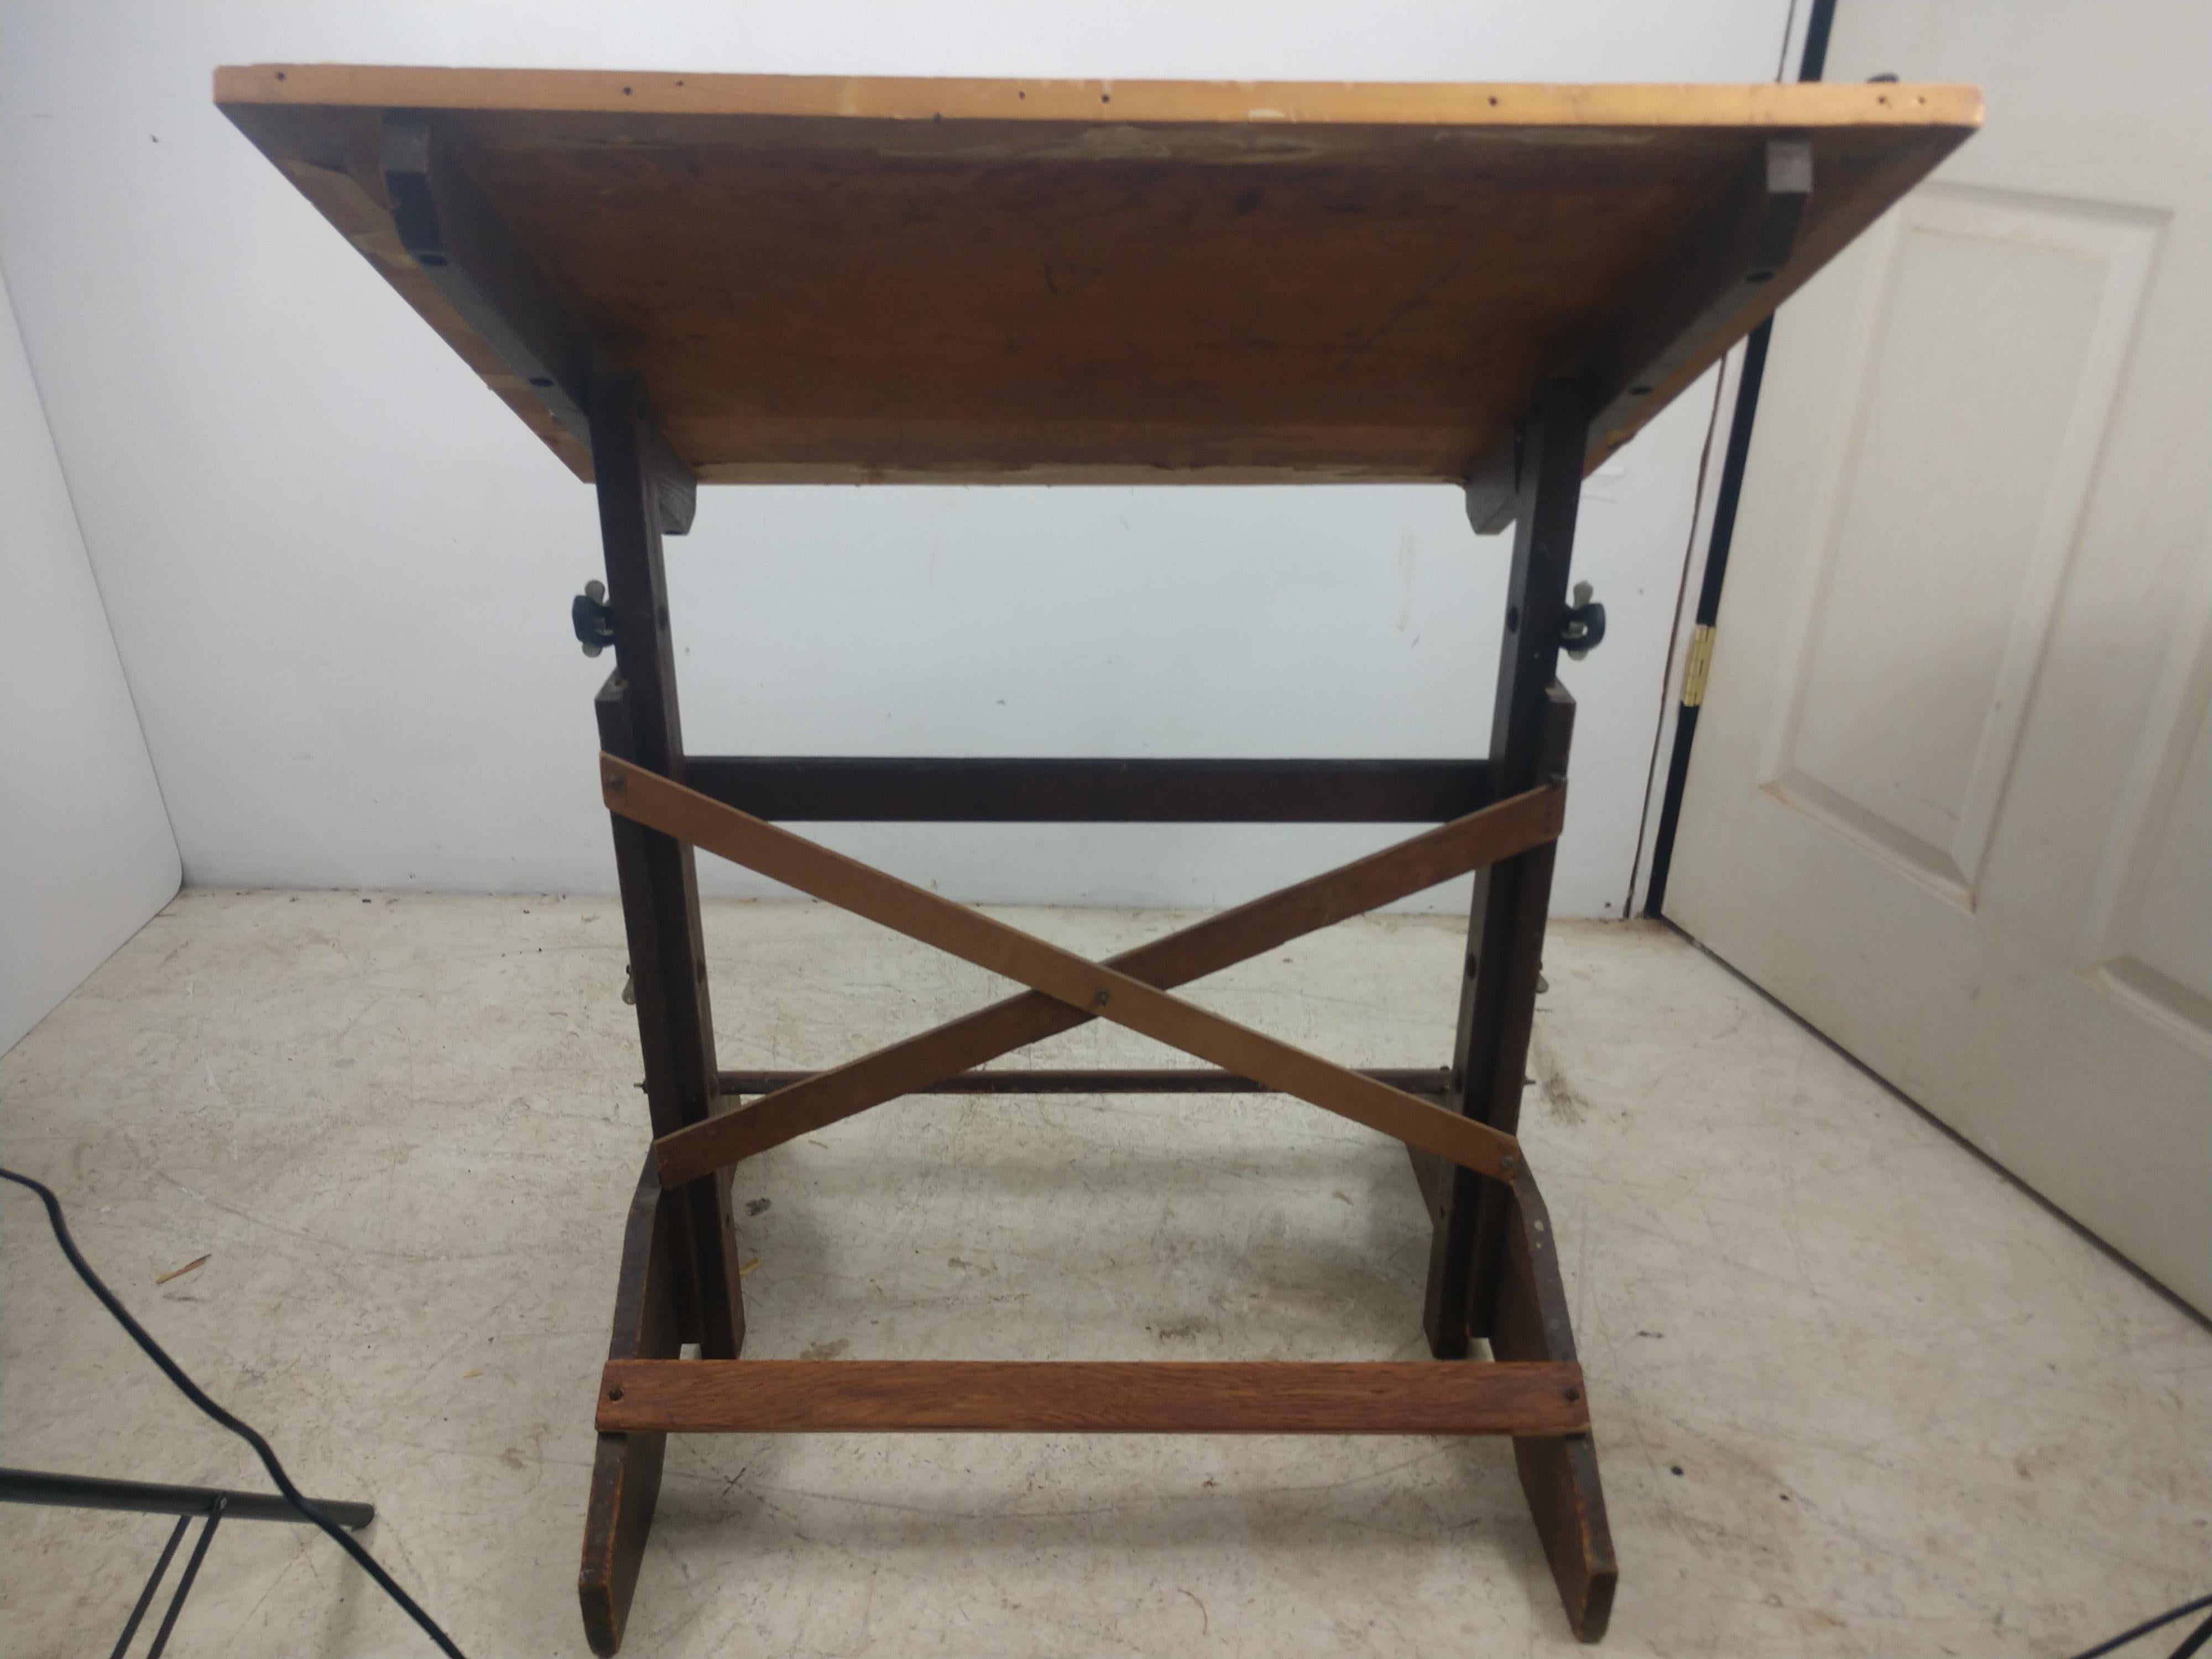 Diminutive pine top drafting table by Ancobilt. A 19th century company that is the premier and lasting builder of drafting tables. Sturdy and small, top is 31 x 23. Reaches a height of 42.5 and lowers to 31.5 iron brackets for adjusting to the angle